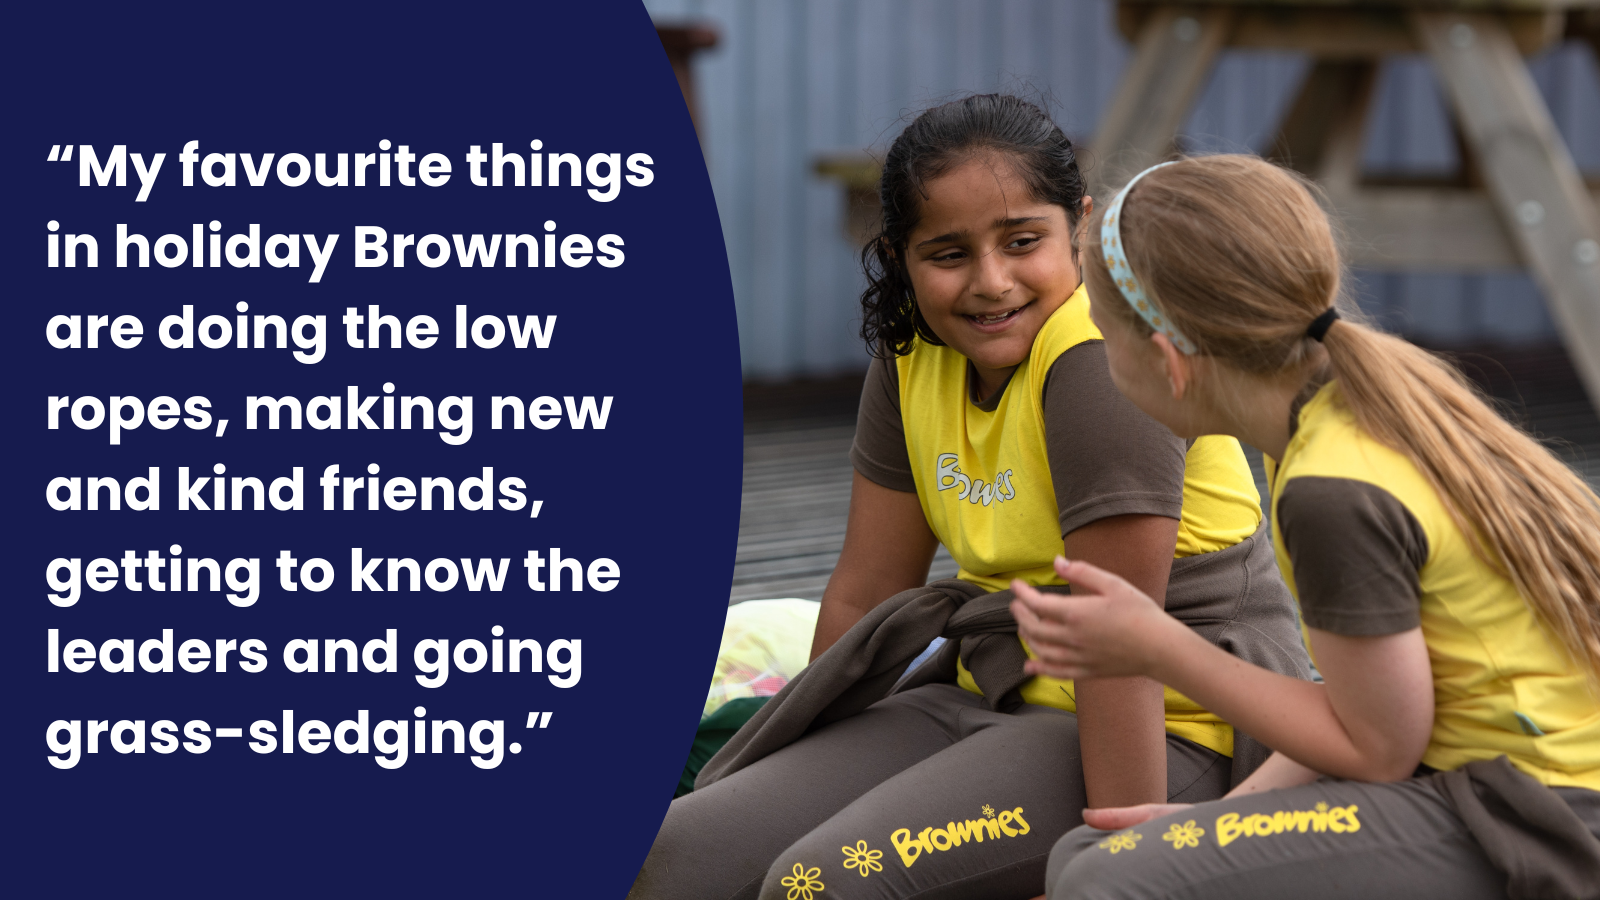 “My favourite things in holiday Brownies are doing the low ropes, making new and kind friends, getting to know the leaders and going grass-sledging”.